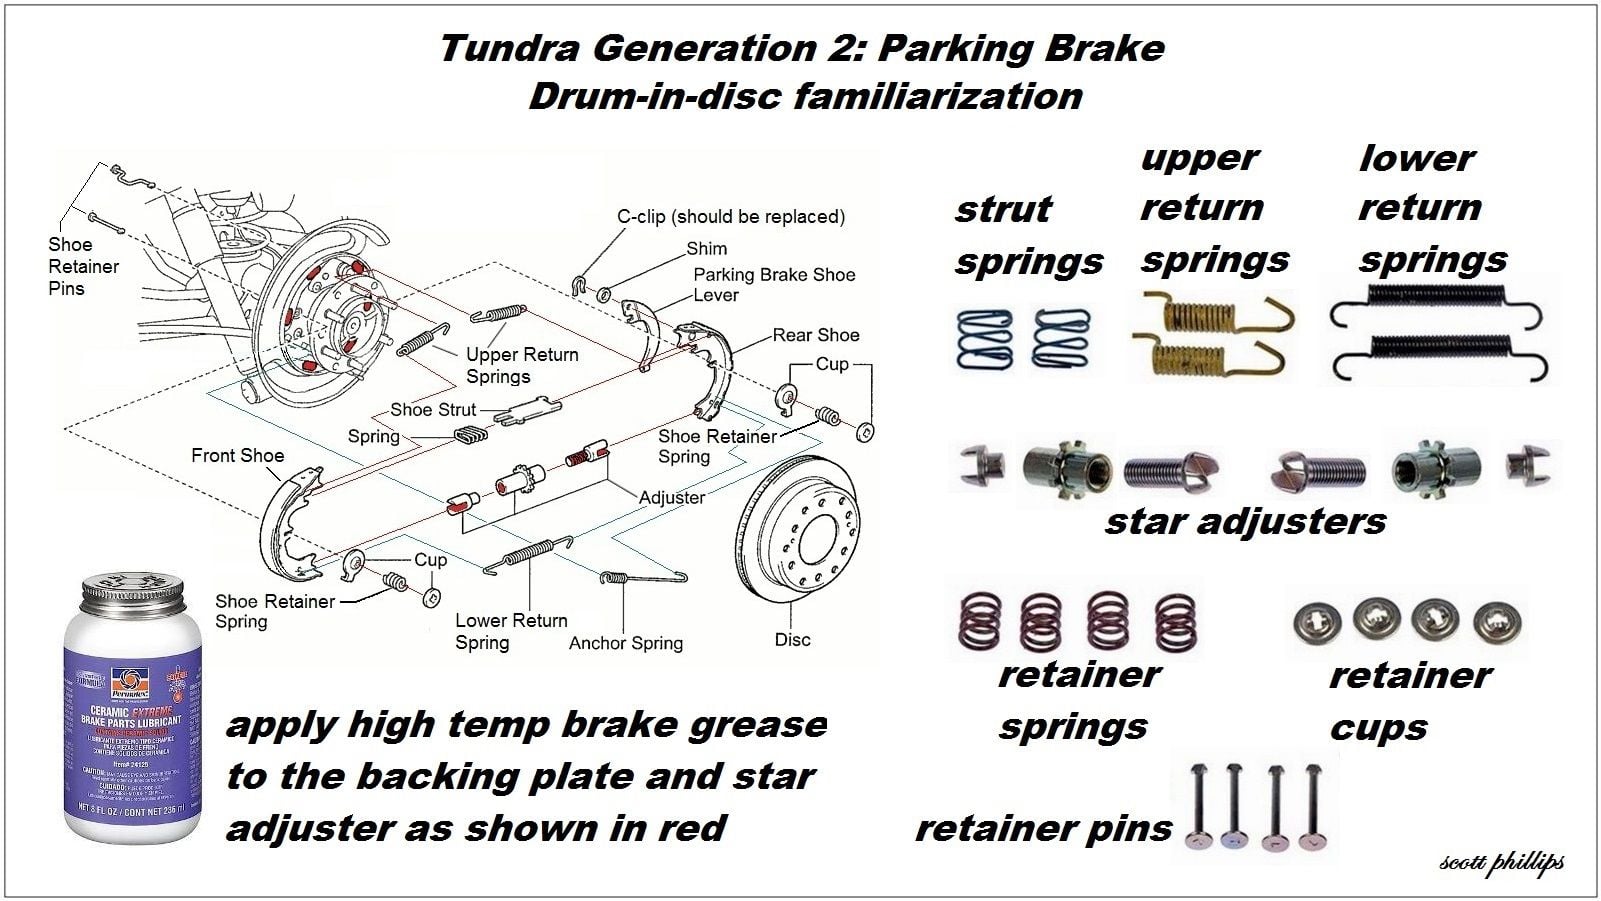 Toyota Tundra: How to Repair and Replace Parking Brake | Yotatech